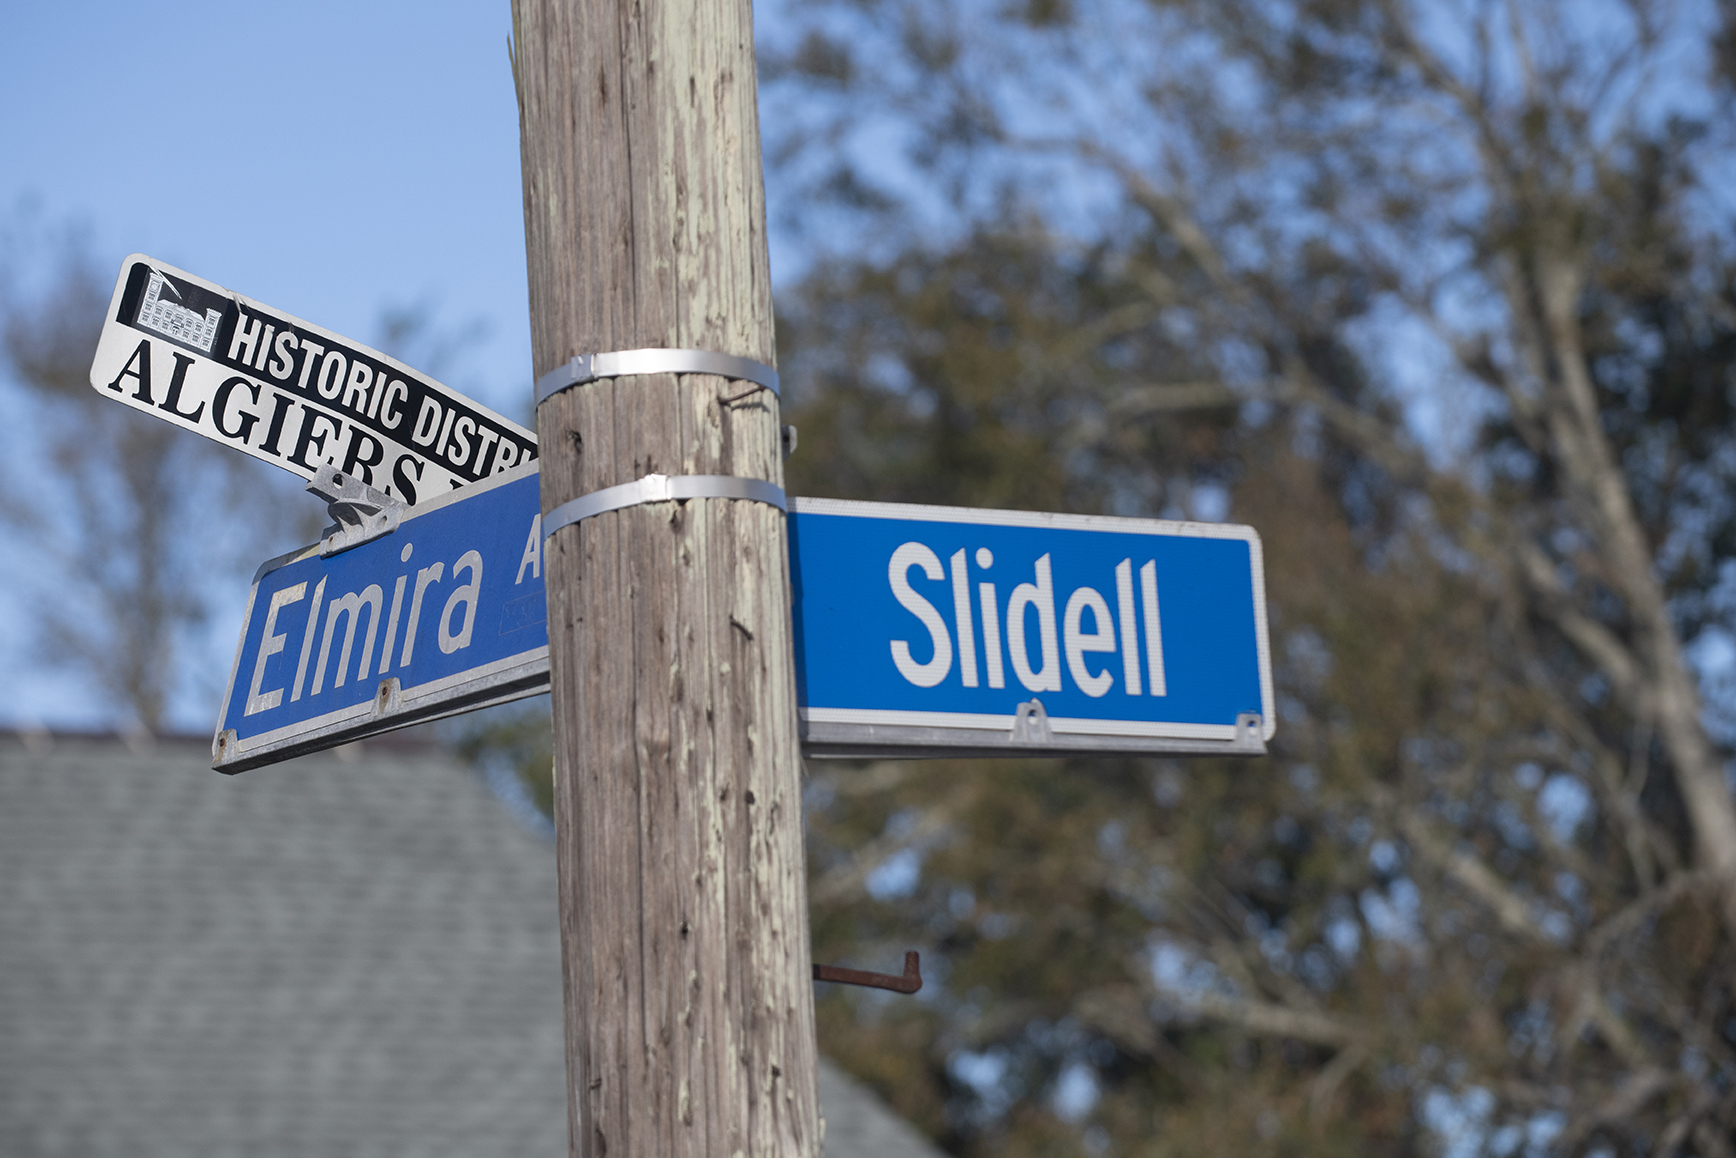 Blue street signs on a wooden poll in New Orleans. The street signs are at the crossroads of Slidell and Elmira, and the historic district of Algiers.